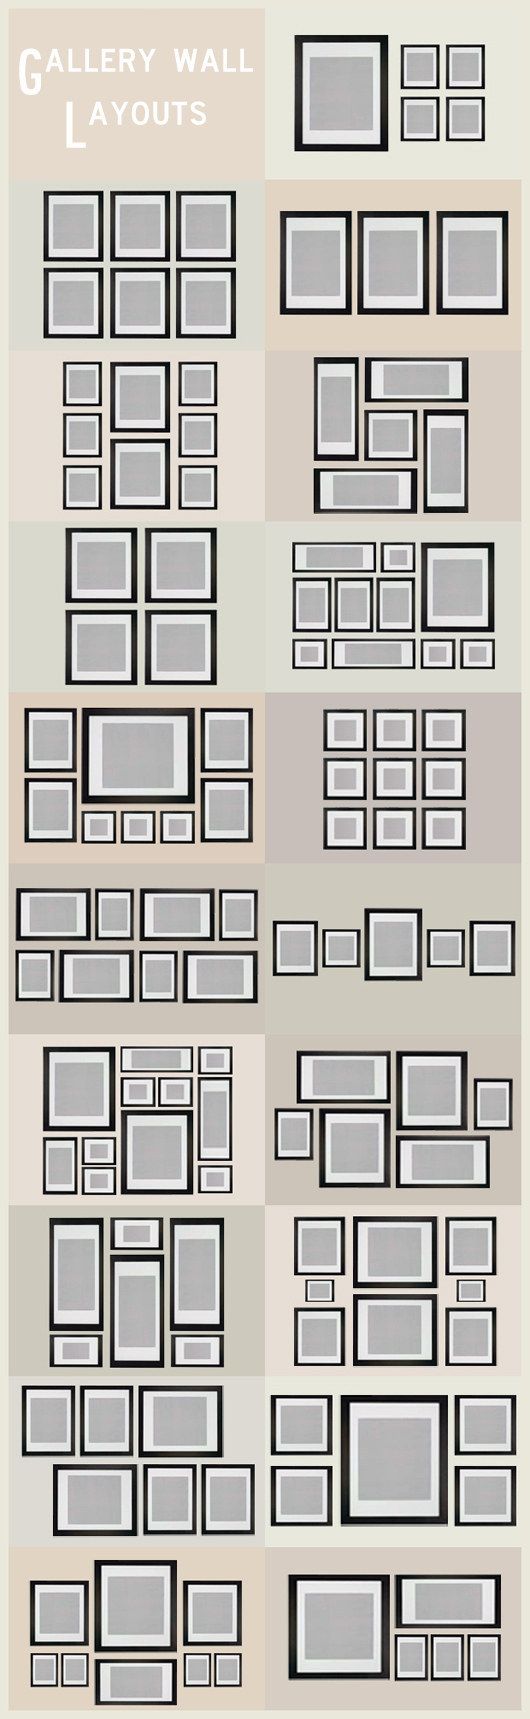 Gallery Wall Layout Ideas -   All You Need To Decorate Your Home